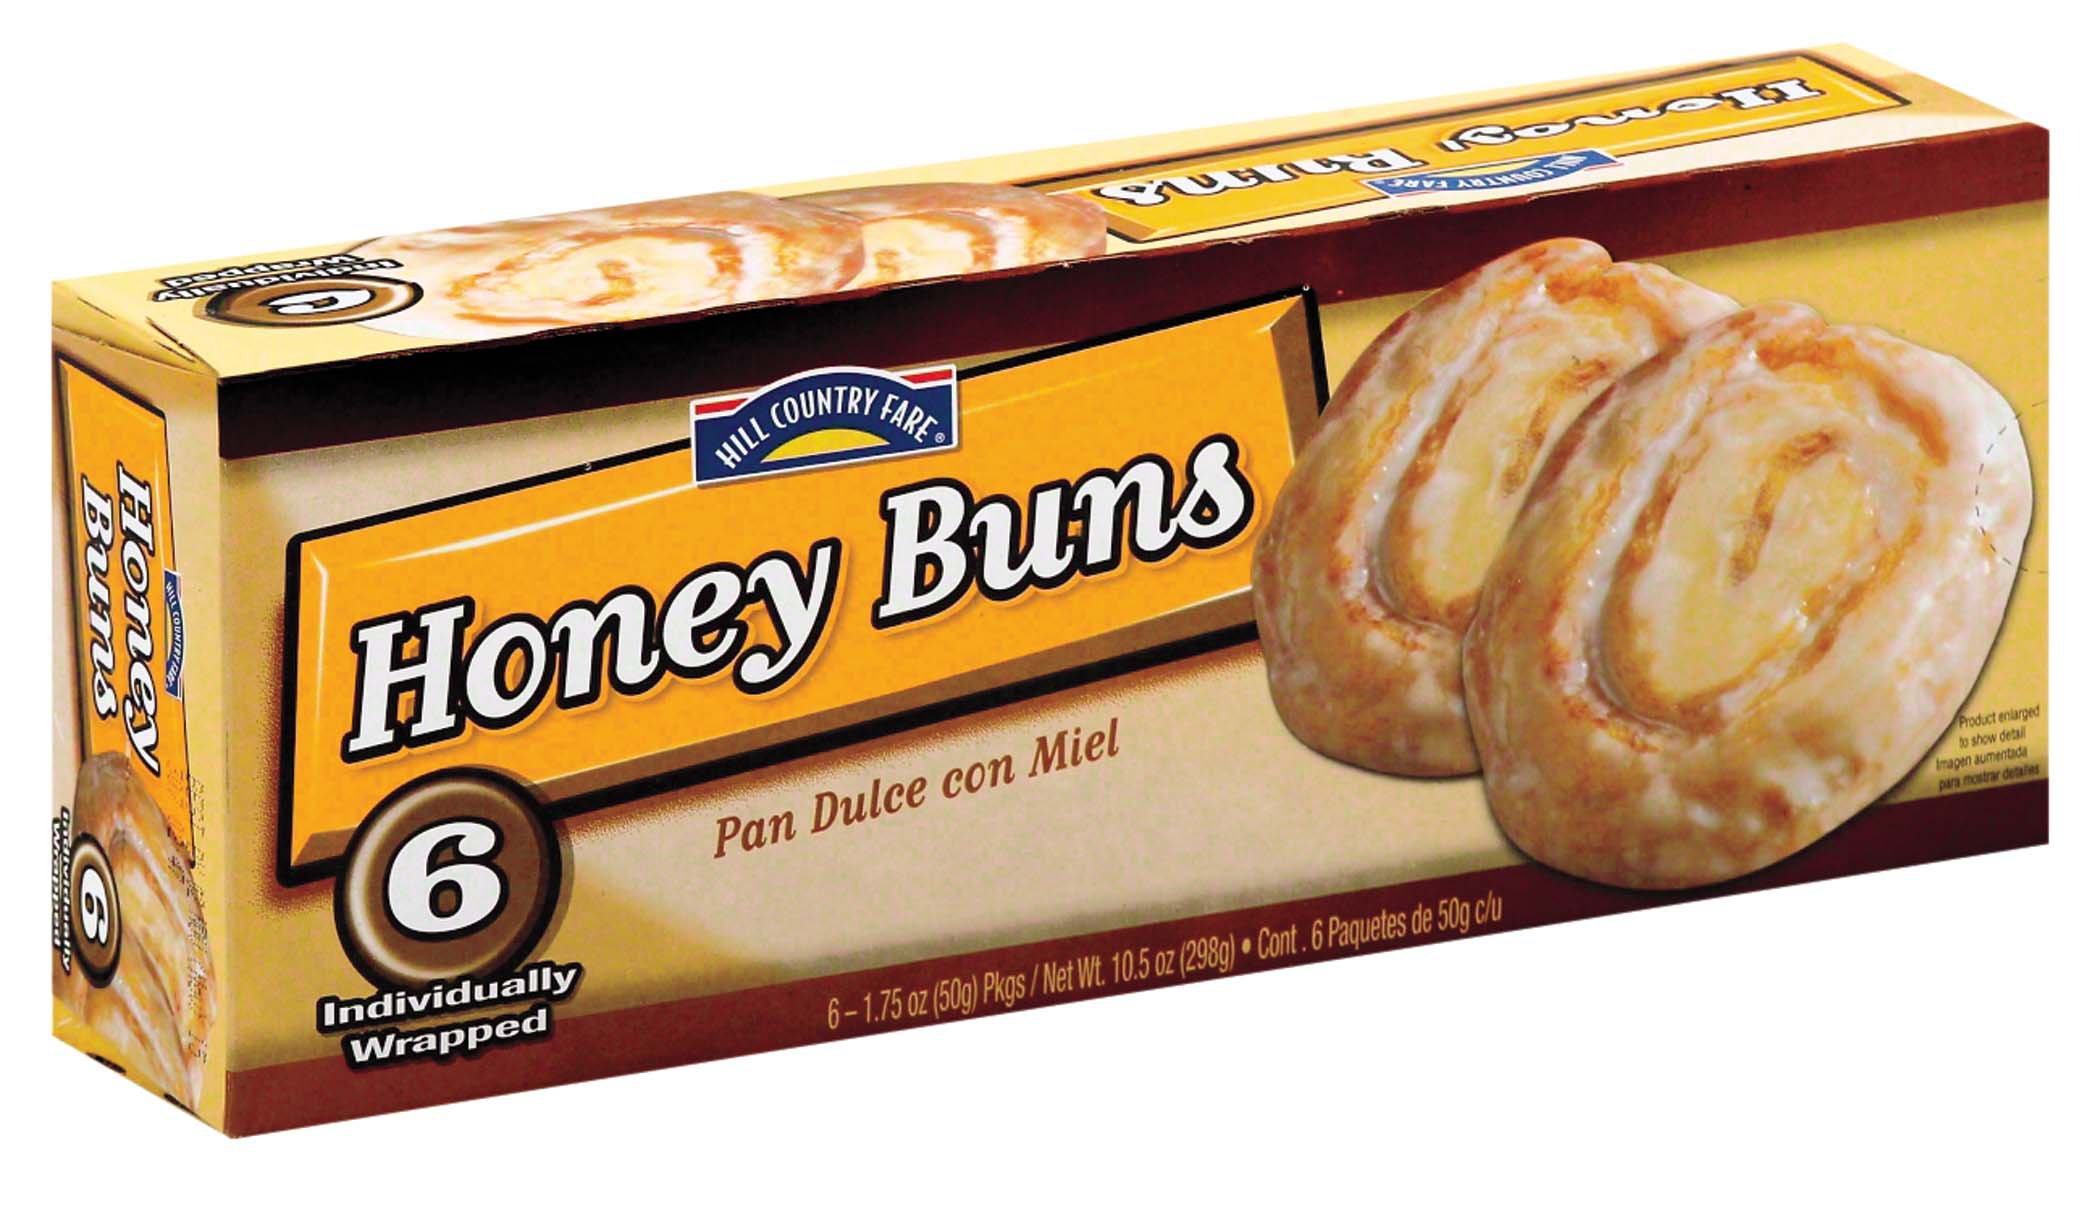 Hill Country Fare Honey Buns